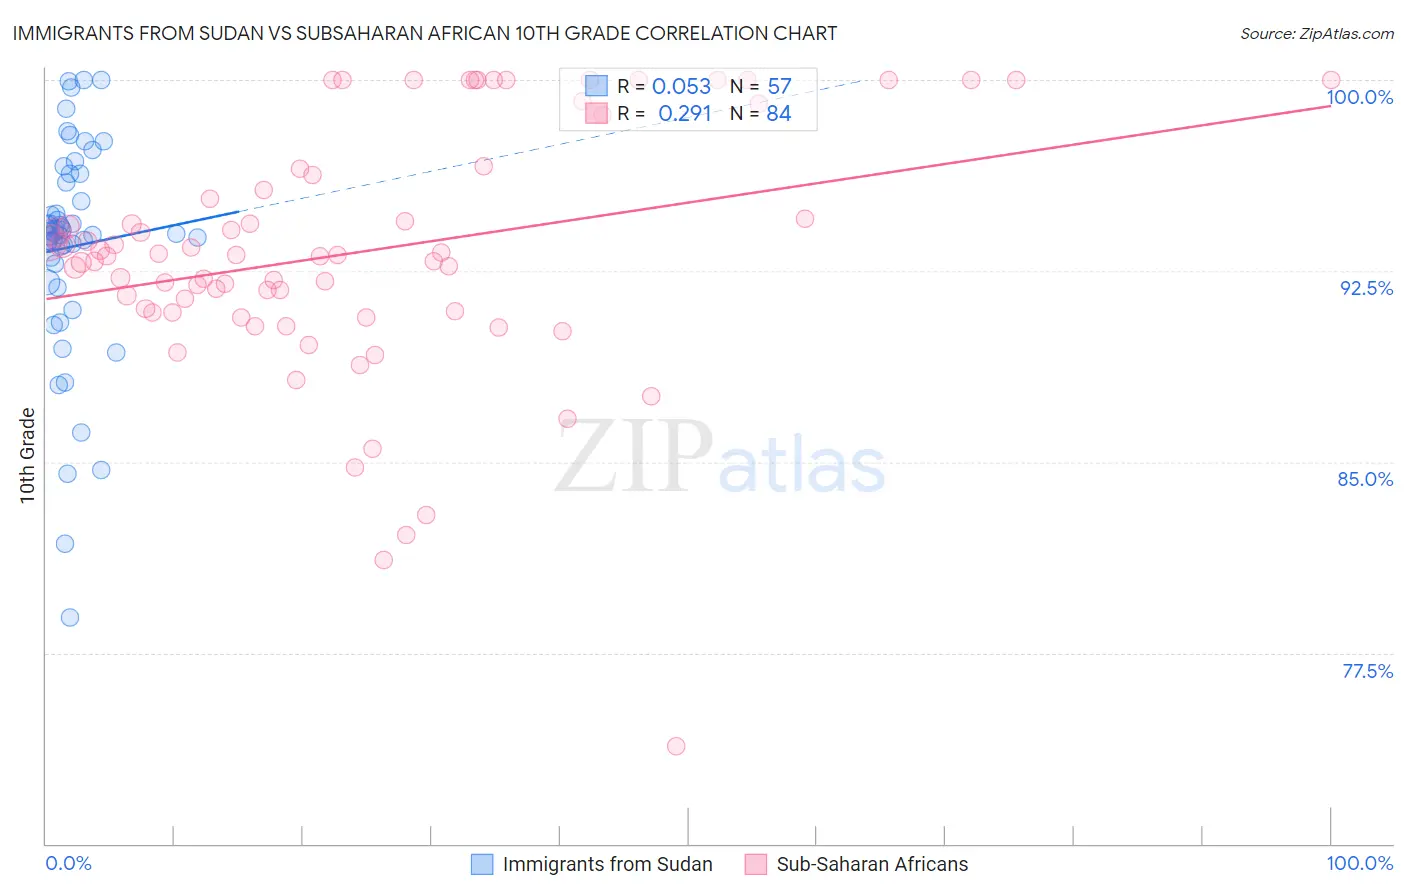 Immigrants from Sudan vs Subsaharan African 10th Grade